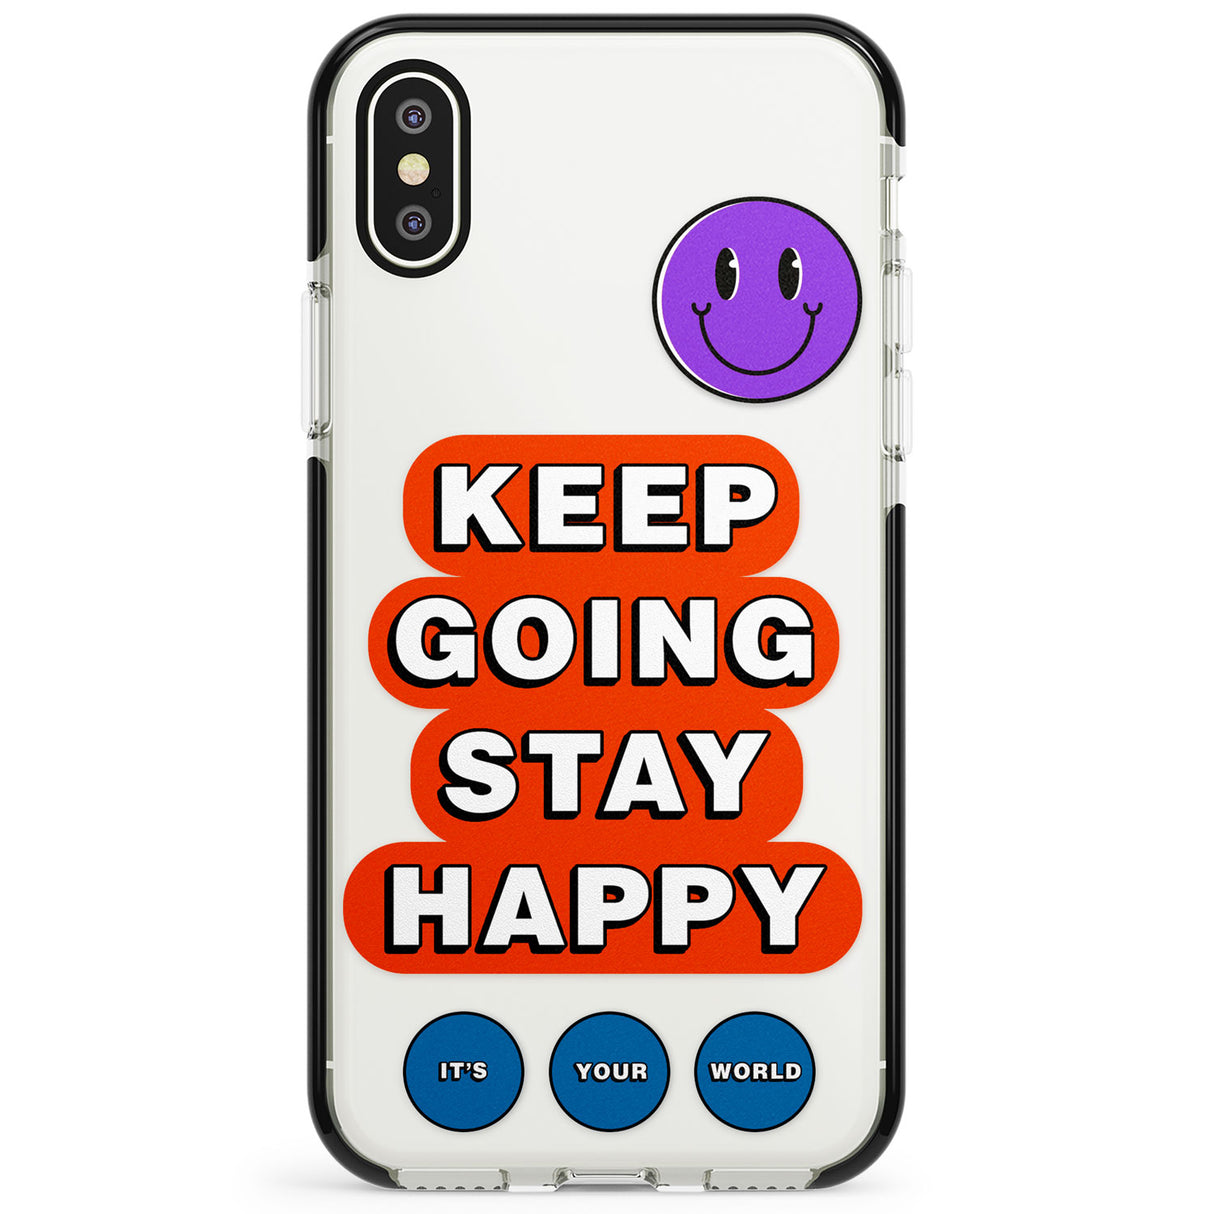 Keep Going Stay Happy Phone Case for iPhone X XS Max XR